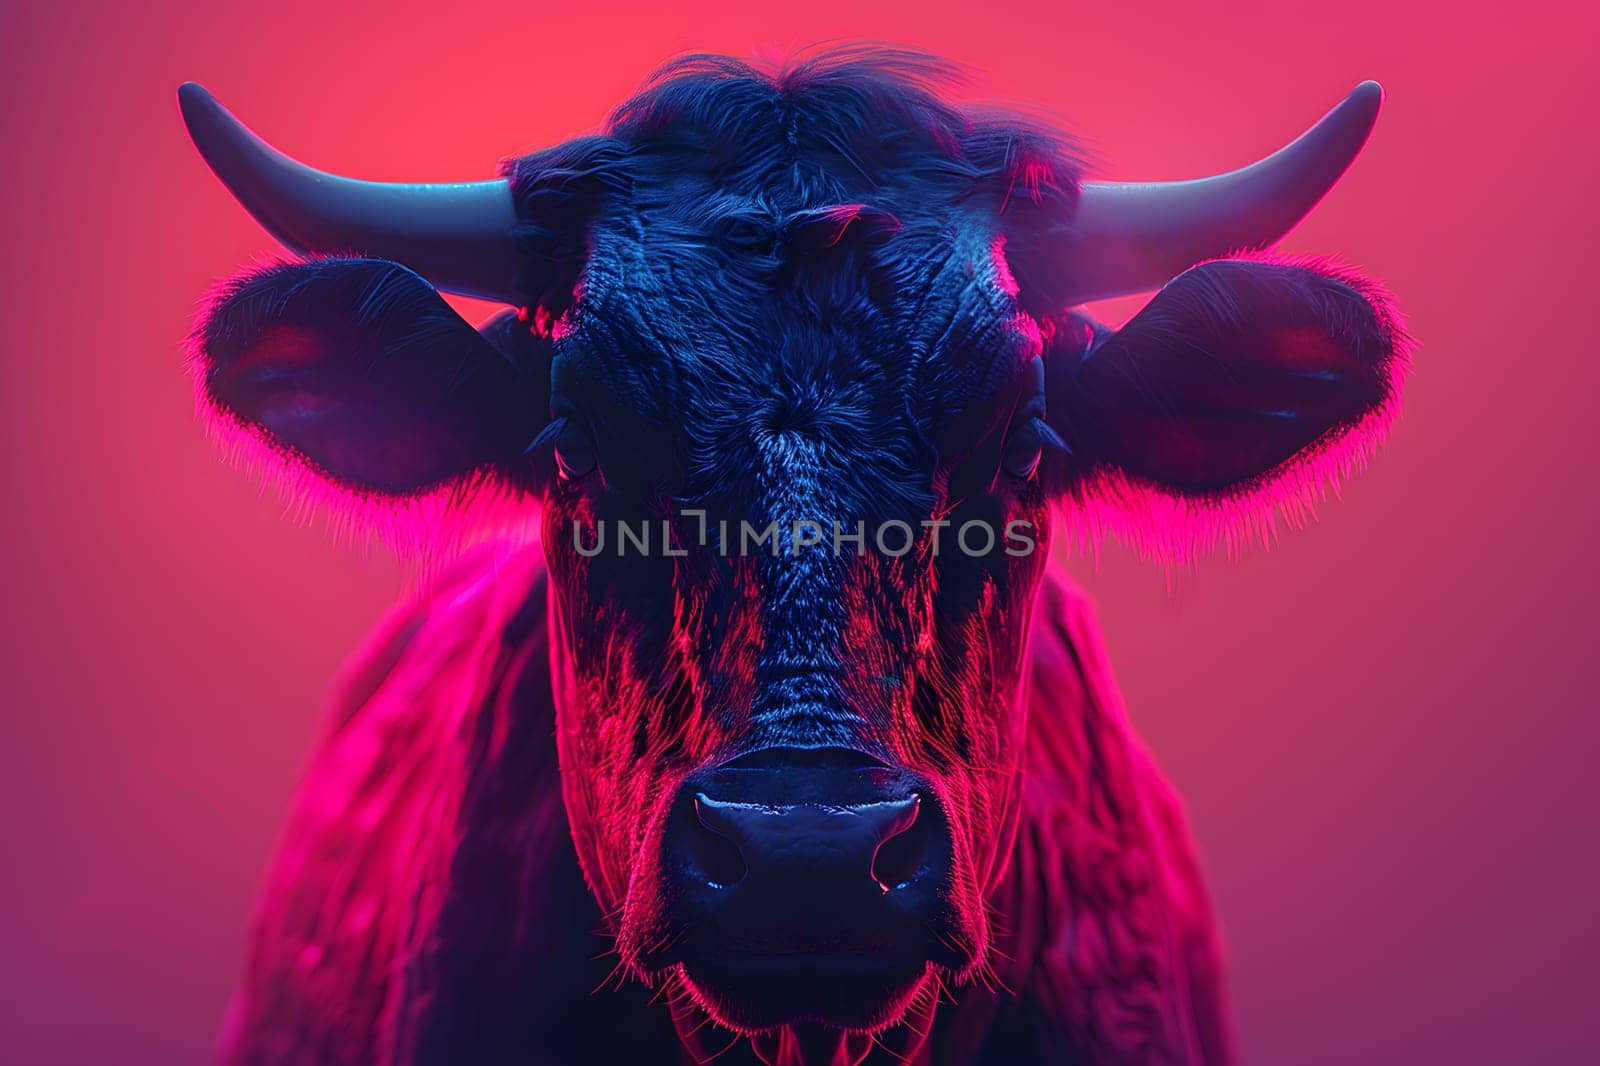 A close up of a bulls head with horns against a red background, showcasing this terrestrial animals powerful snout and striking features in shades of purple and magenta